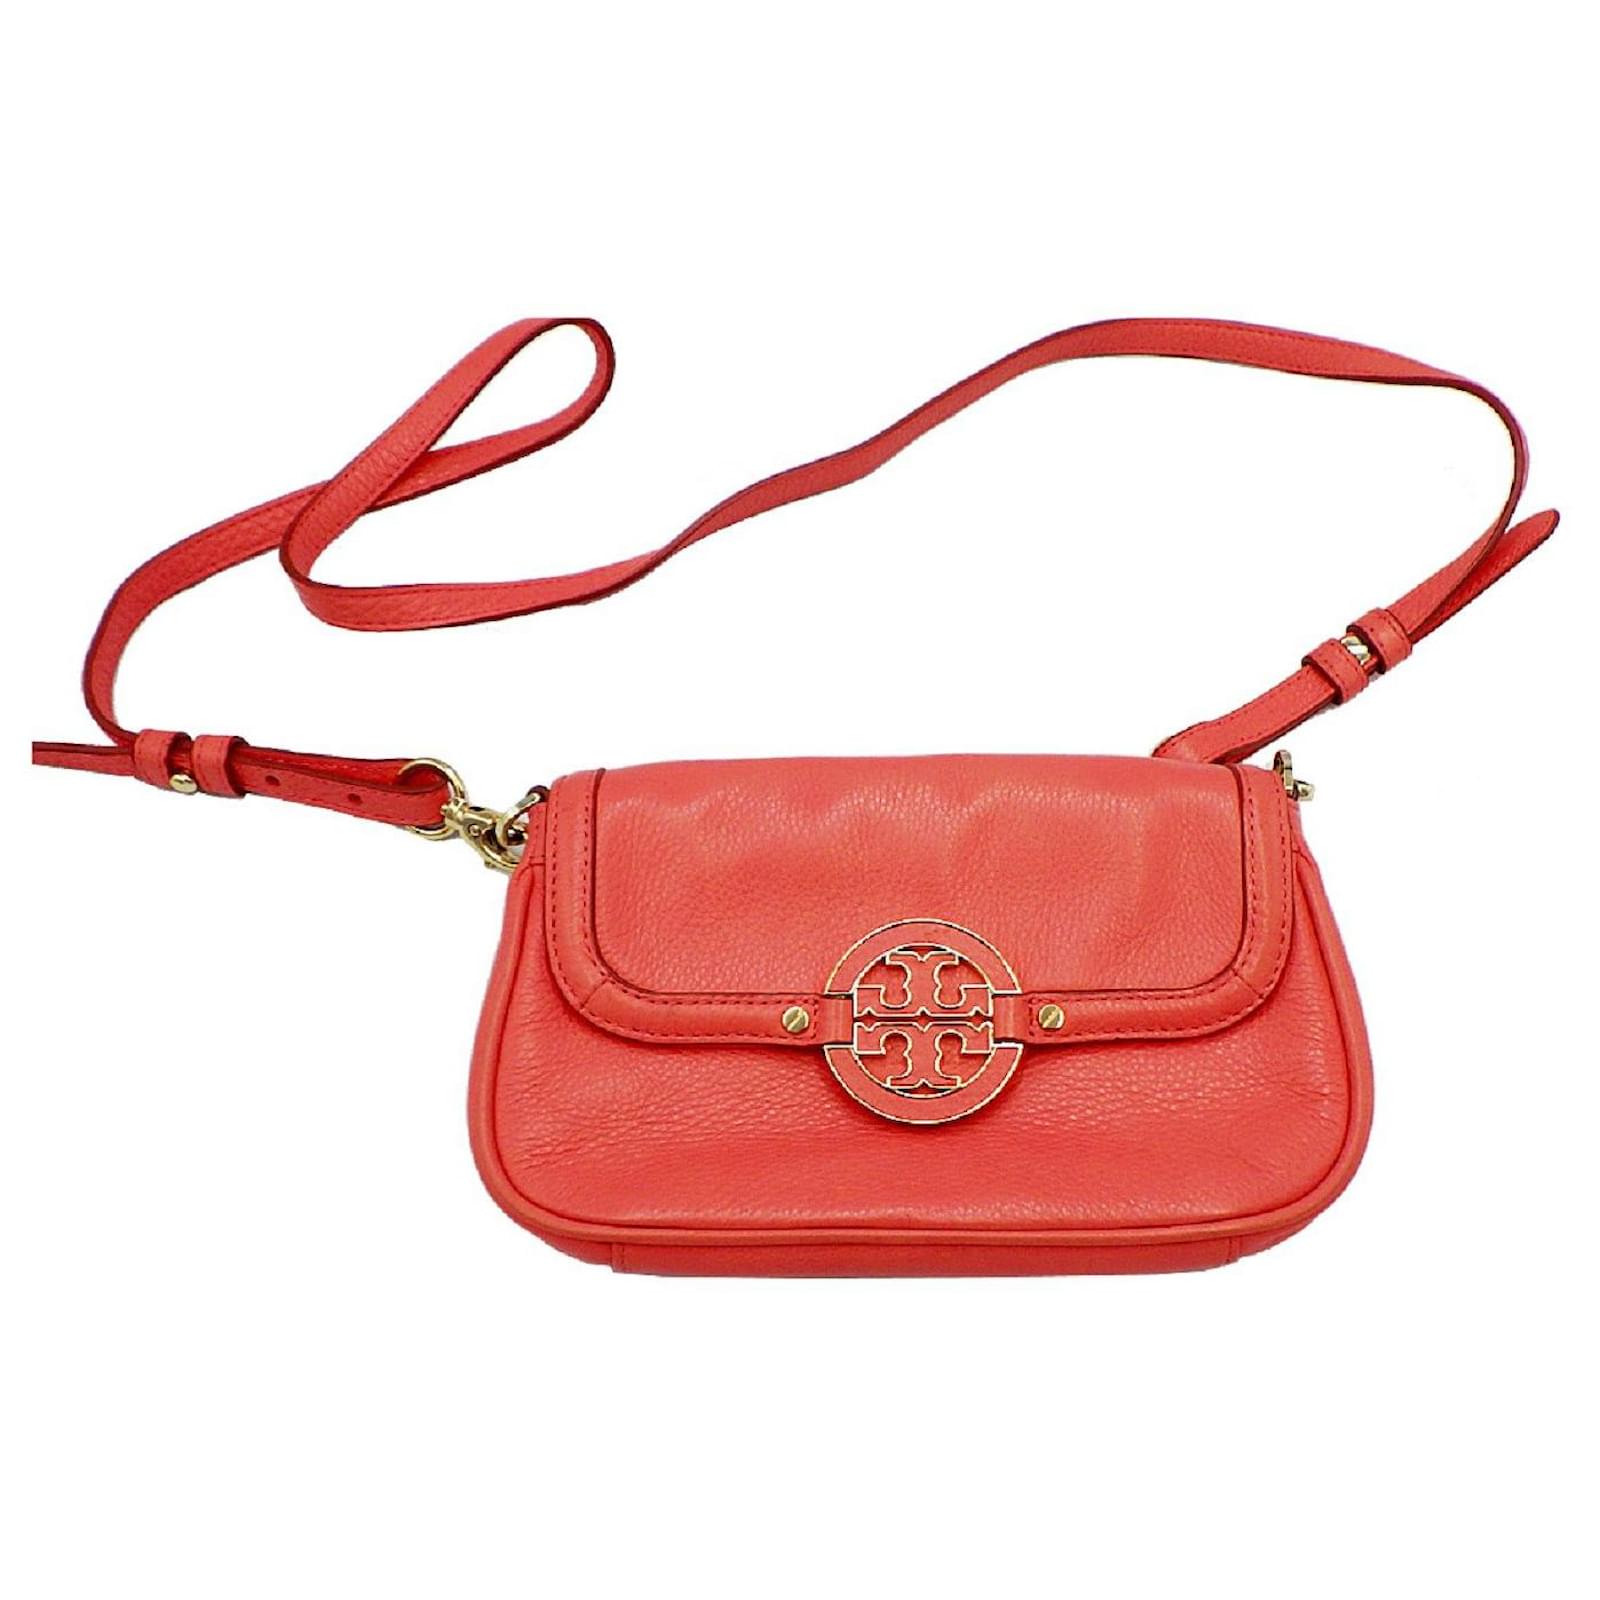 Tory Burch Pre-owned Leather Shoulder Bag